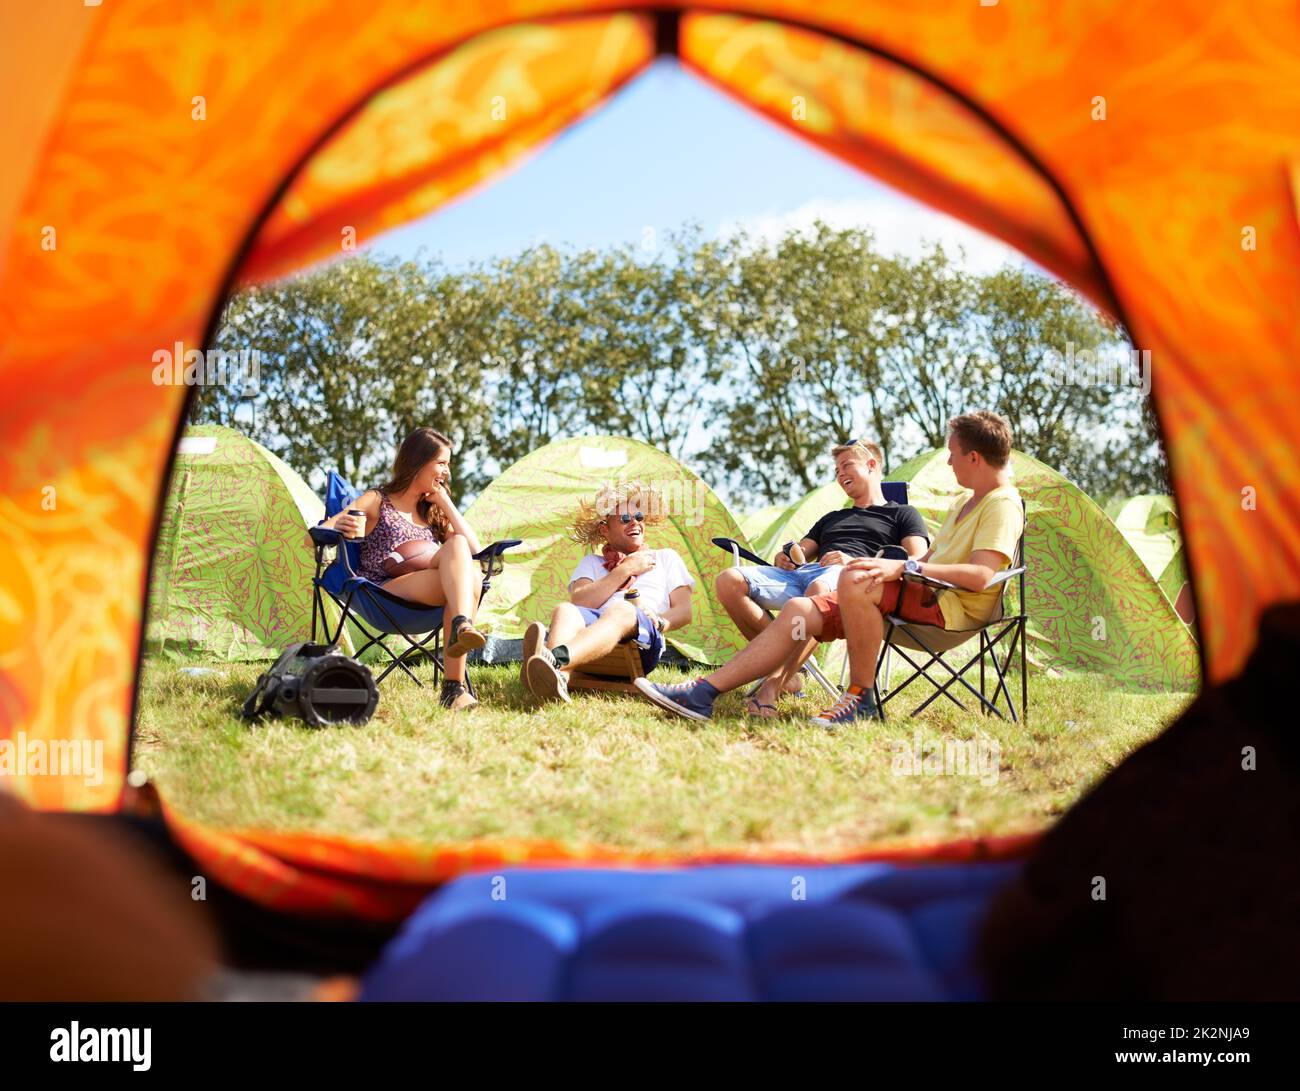 https://c8.alamy.com/comp/2K2NJA9/camping-with-friends-is-the-best-part-of-this-festival-shot-of-a-group-of-friends-sitting-outside-their-tent-at-a-festival-2K2NJA9.jpg